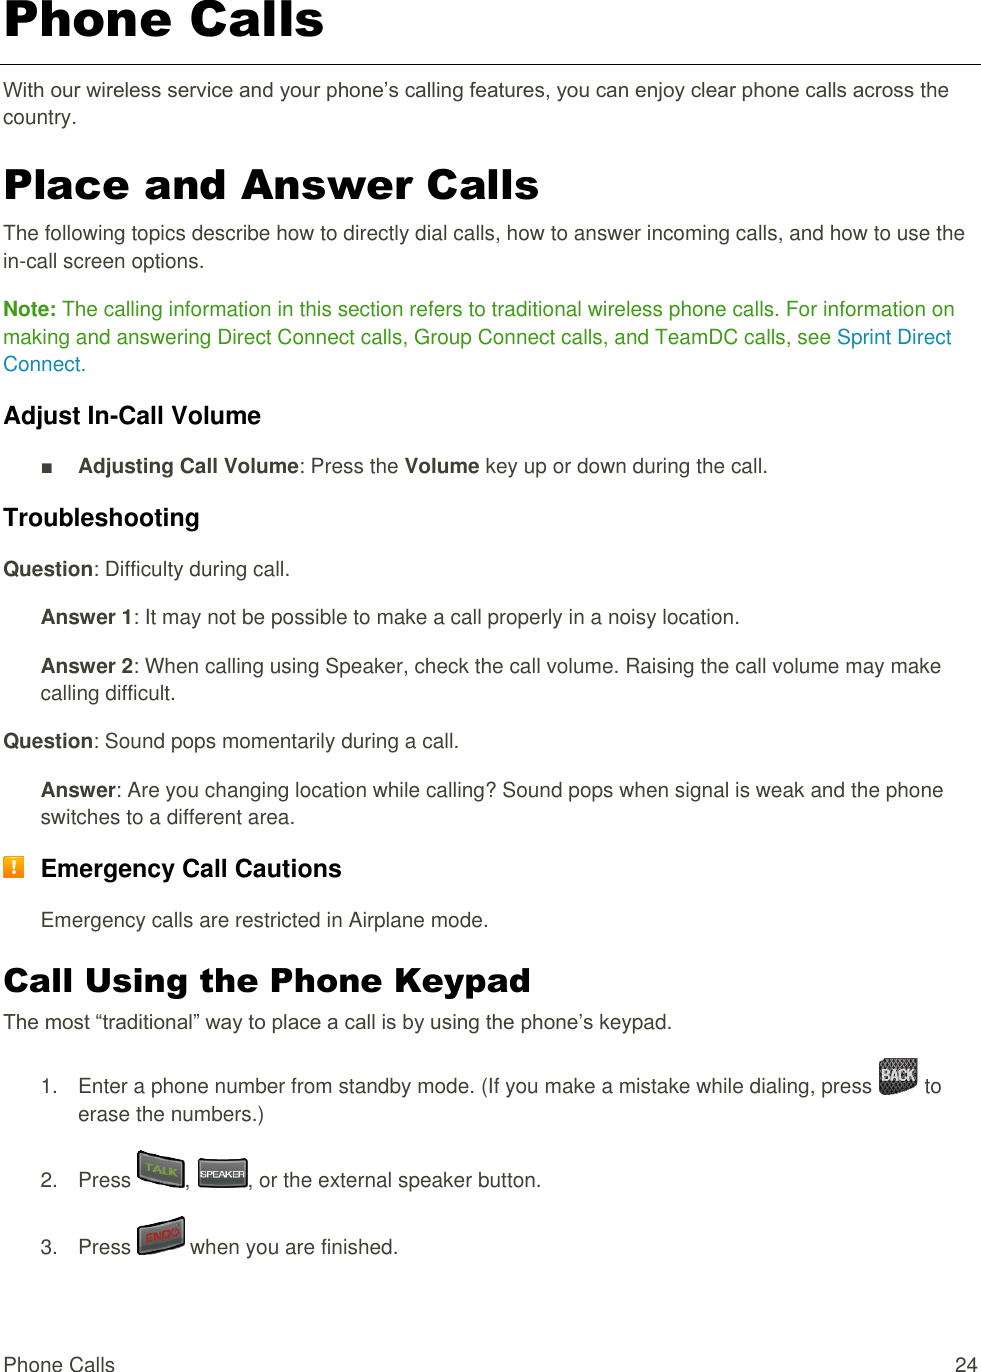  Phone Calls  24 Phone Calls With our wireless service and your phone’s calling features, you can enjoy clear phone calls across the country. Place and Answer Calls The following topics describe how to directly dial calls, how to answer incoming calls, and how to use the in-call screen options. Note: The calling information in this section refers to traditional wireless phone calls. For information on making and answering Direct Connect calls, Group Connect calls, and TeamDC calls, see Sprint Direct Connect. Adjust In-Call Volume ■ Adjusting Call Volume: Press the Volume key up or down during the call. Troubleshooting Question: Difficulty during call. Answer 1: It may not be possible to make a call properly in a noisy location. Answer 2: When calling using Speaker, check the call volume. Raising the call volume may make calling difficult. Question: Sound pops momentarily during a call. Answer: Are you changing location while calling? Sound pops when signal is weak and the phone switches to a different area.  Emergency Call Cautions Emergency calls are restricted in Airplane mode. Call Using the Phone Keypad The most “traditional” way to place a call is by using the phone’s keypad.  1.  Enter a phone number from standby mode. (If you make a mistake while dialing, press   to erase the numbers.) 2.  Press  ,  , or the external speaker button. 3.  Press   when you are finished. 